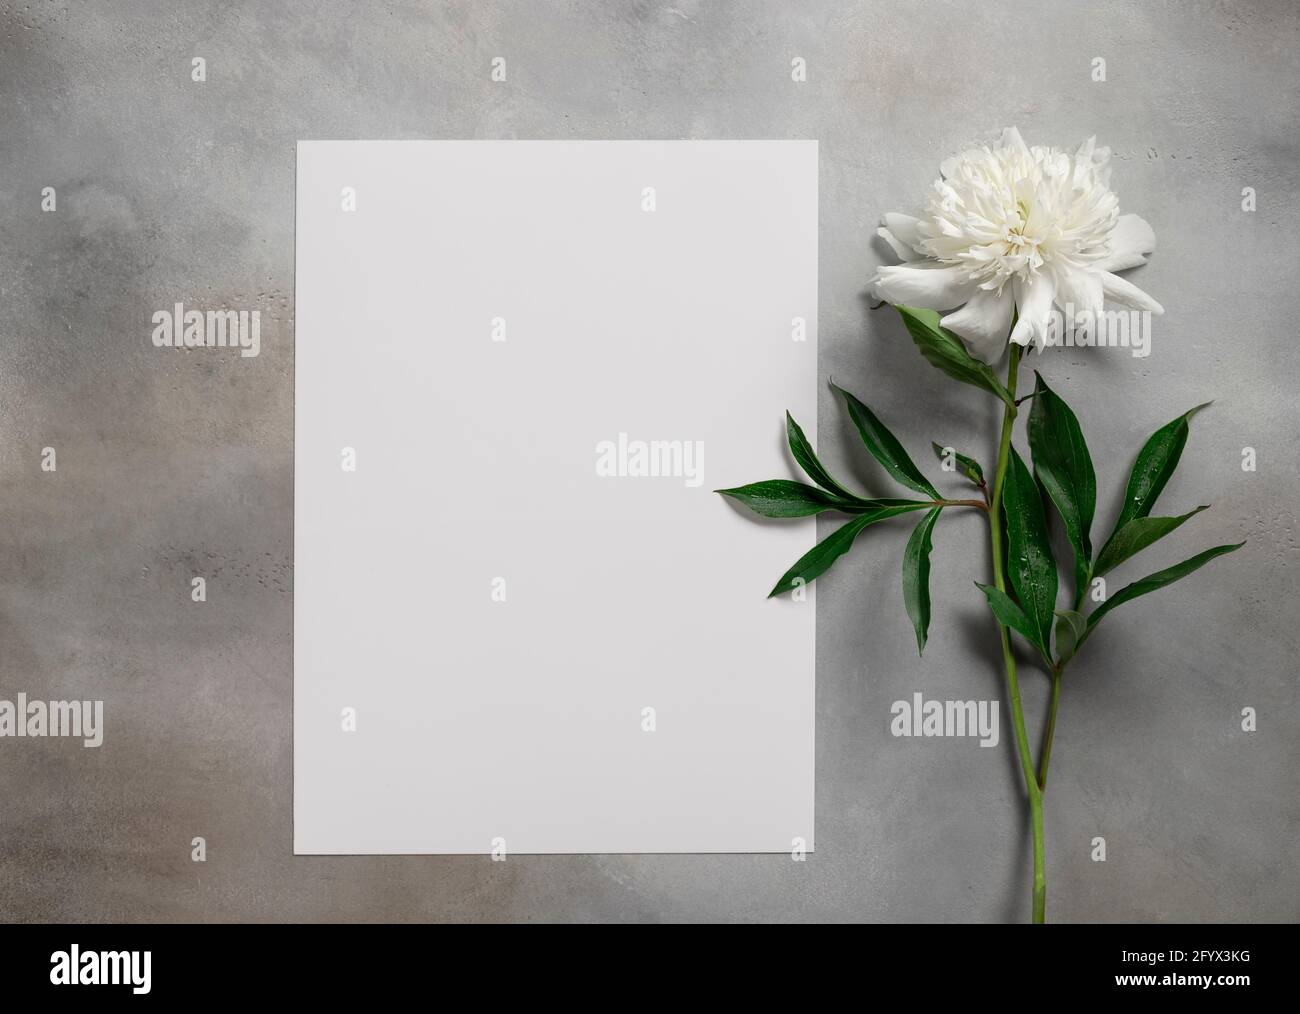 Minimalistic card mockup with white peony. Blank frame for text. Gray background. flat lay Stock Photo